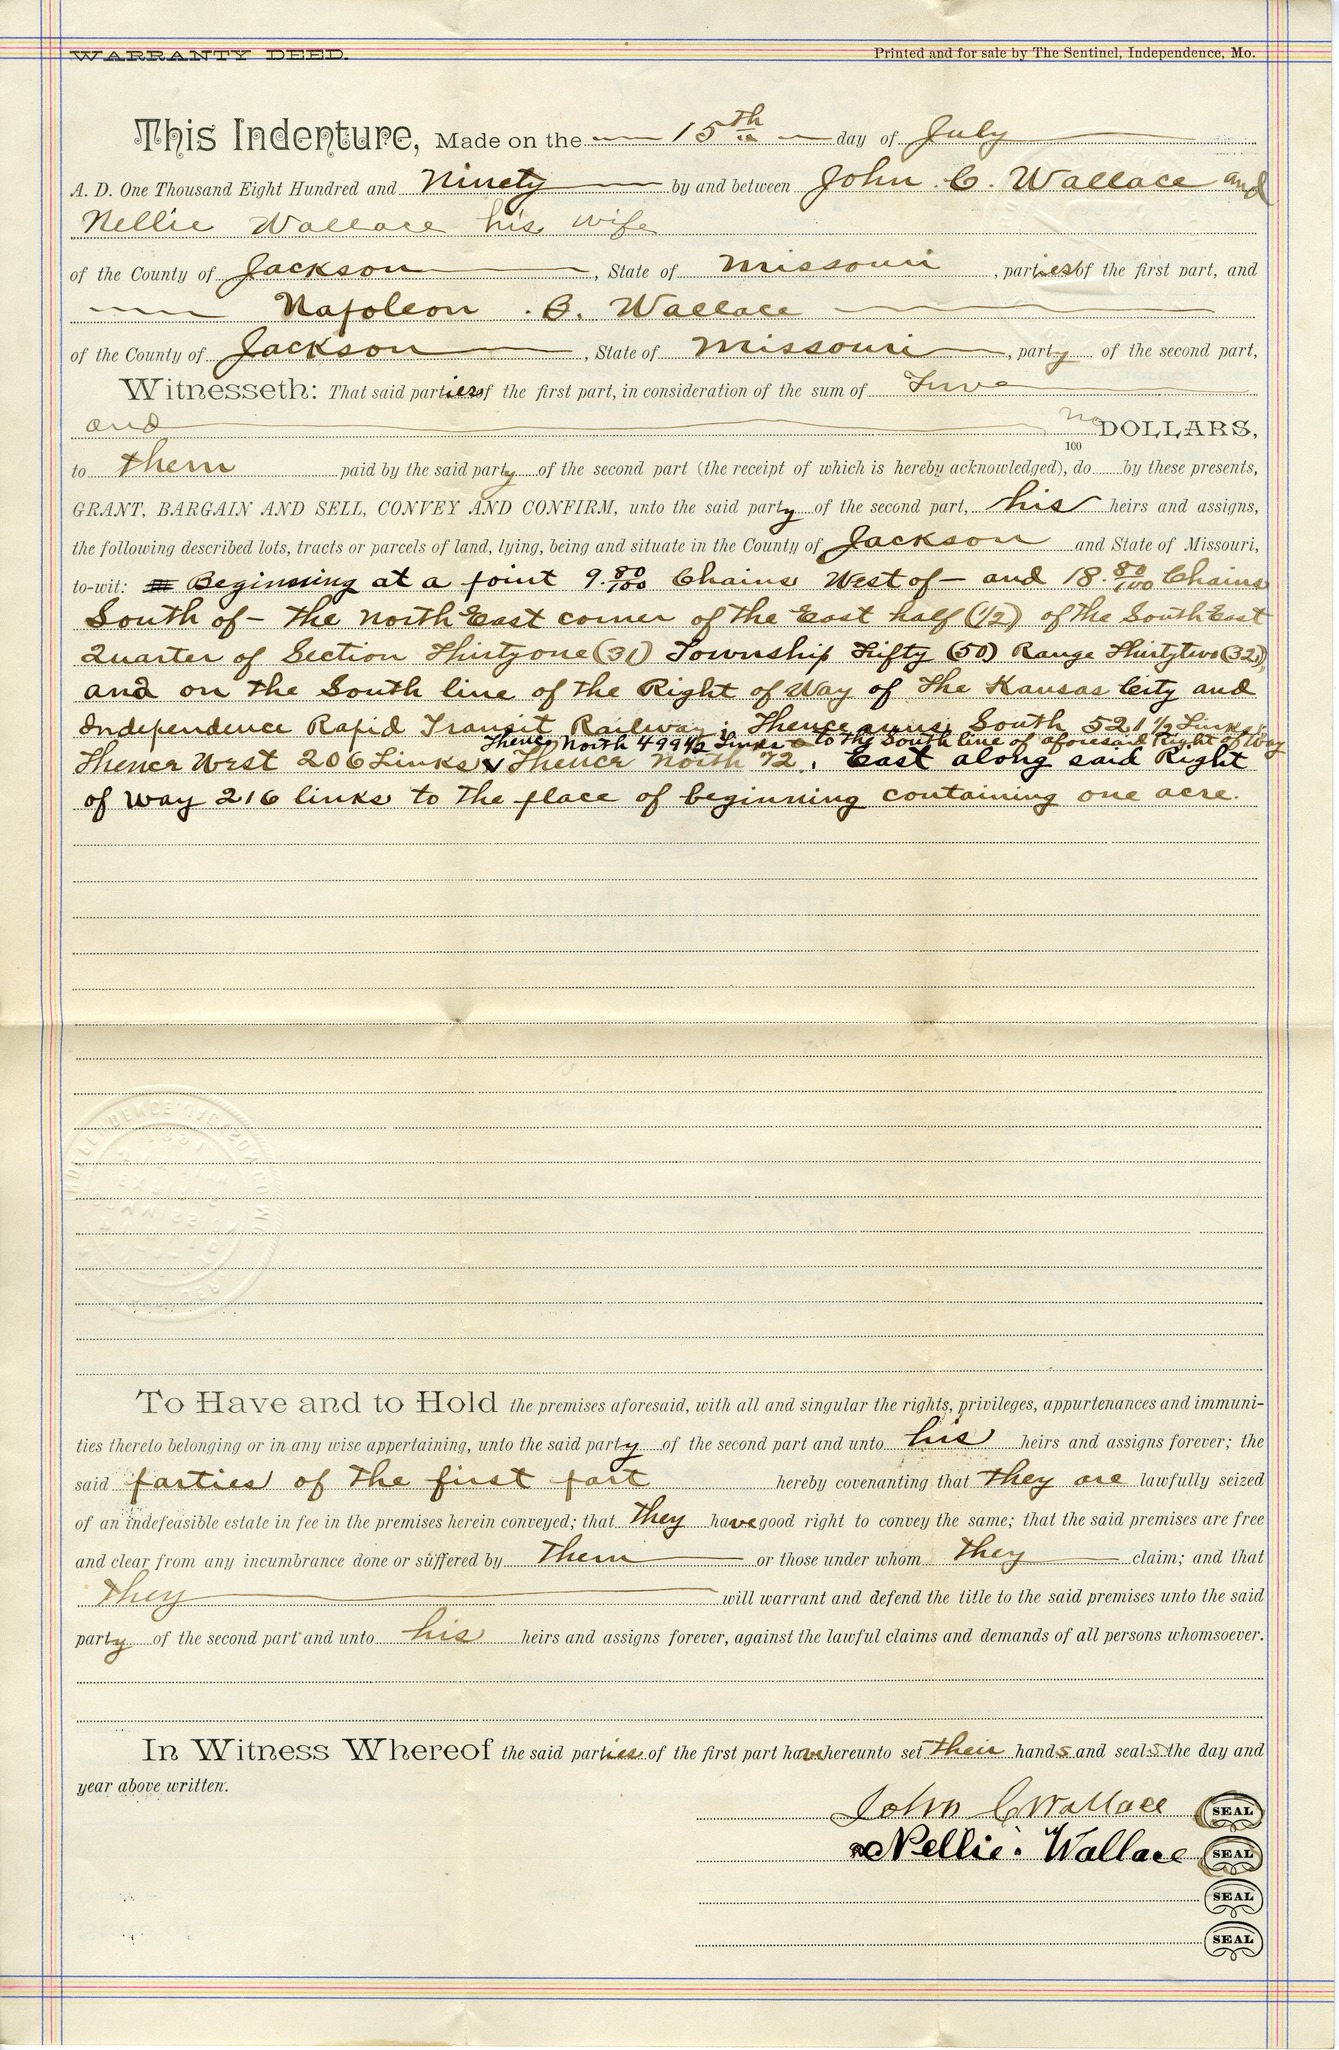 Warranty Deed from John C. Wallace and Nellie Wallace to Napoleon B. Wallace